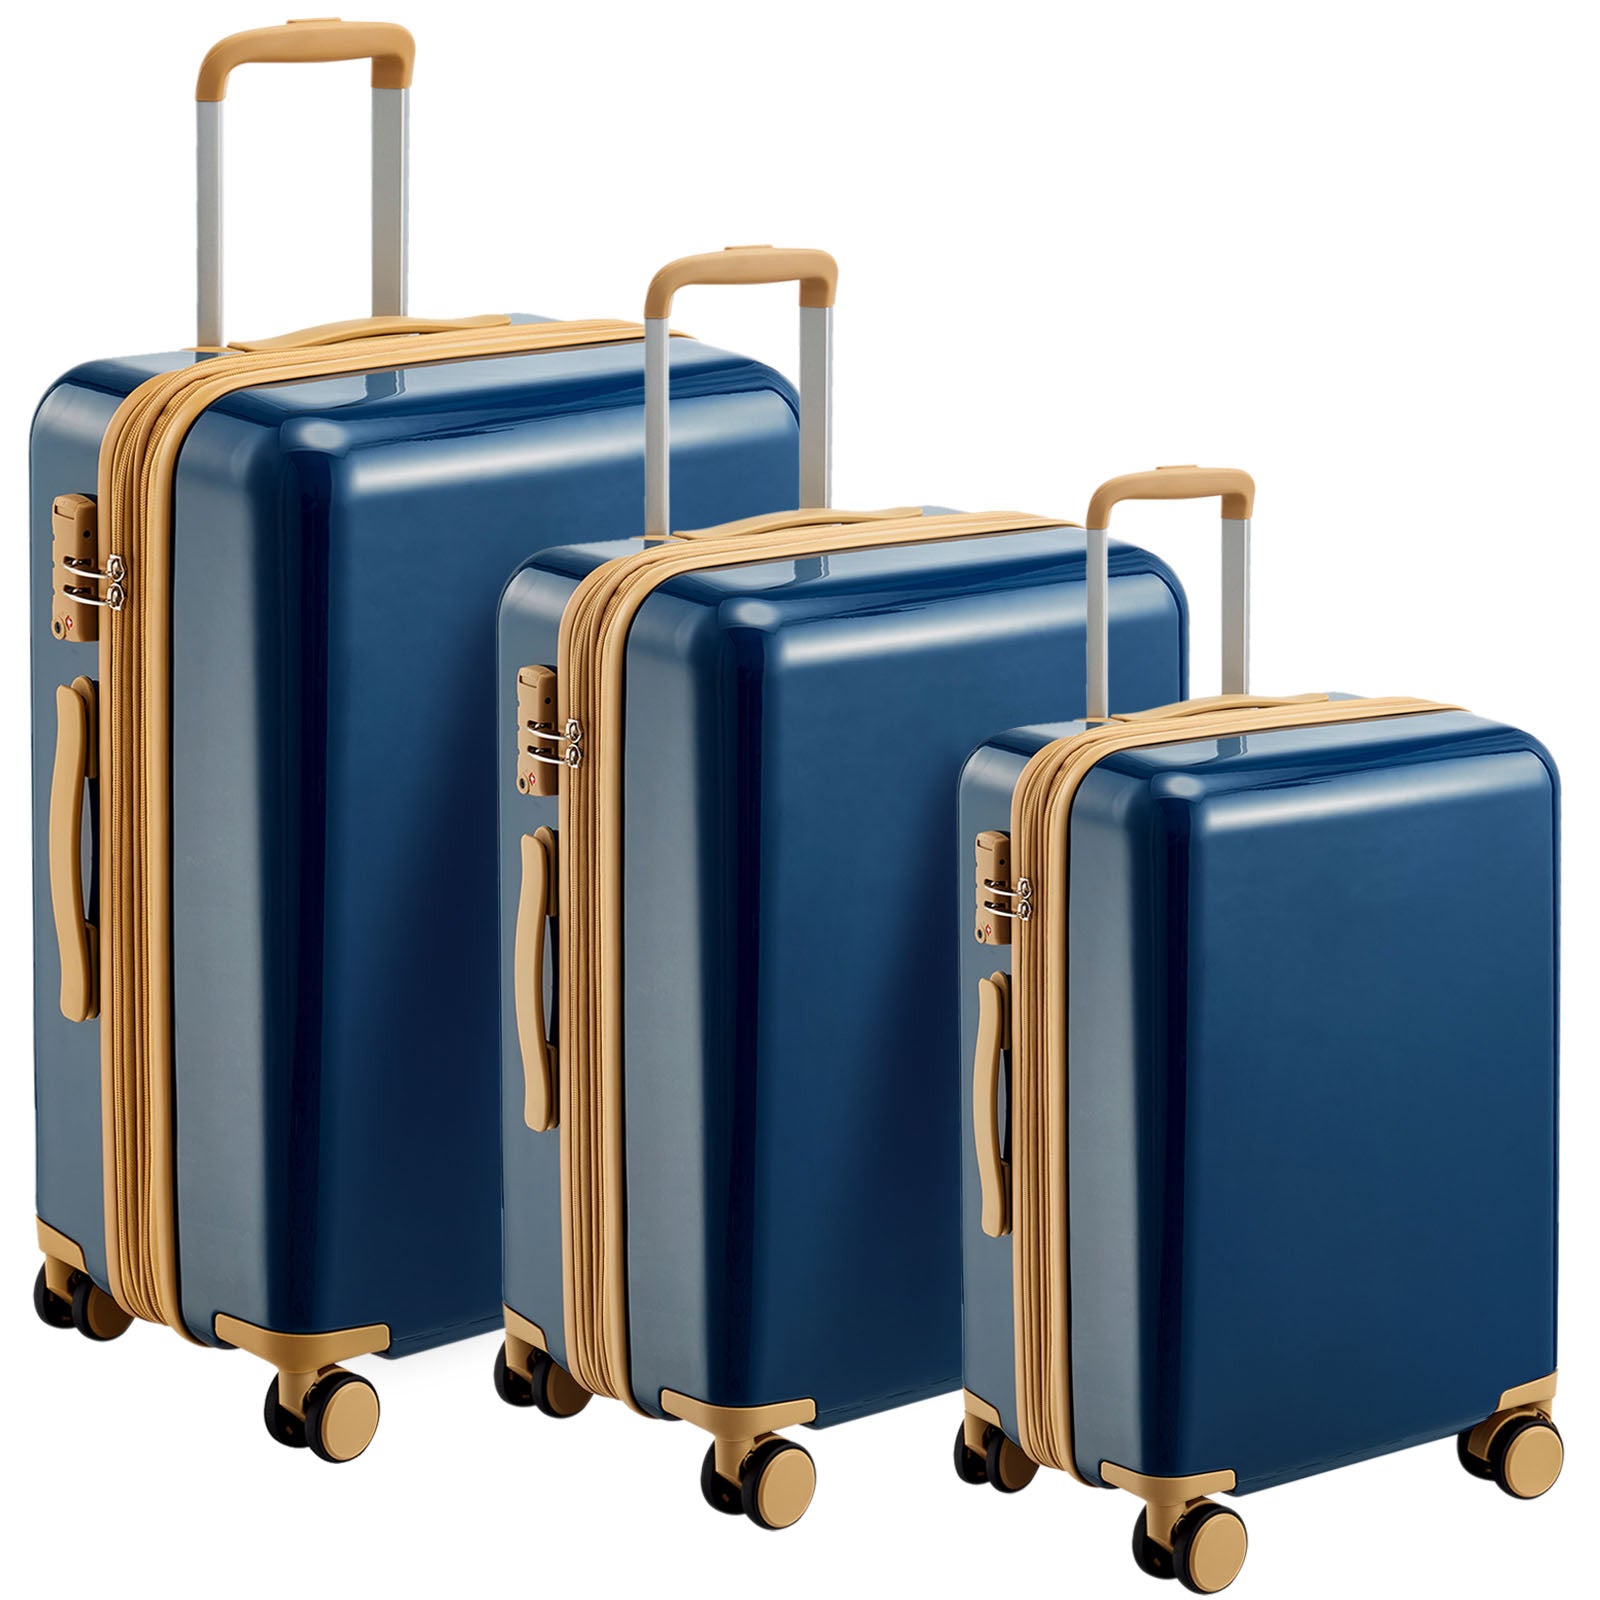 Hardshell PC Luggage Sets 3 Piece Spinner 8 wheels blue-abs+pc